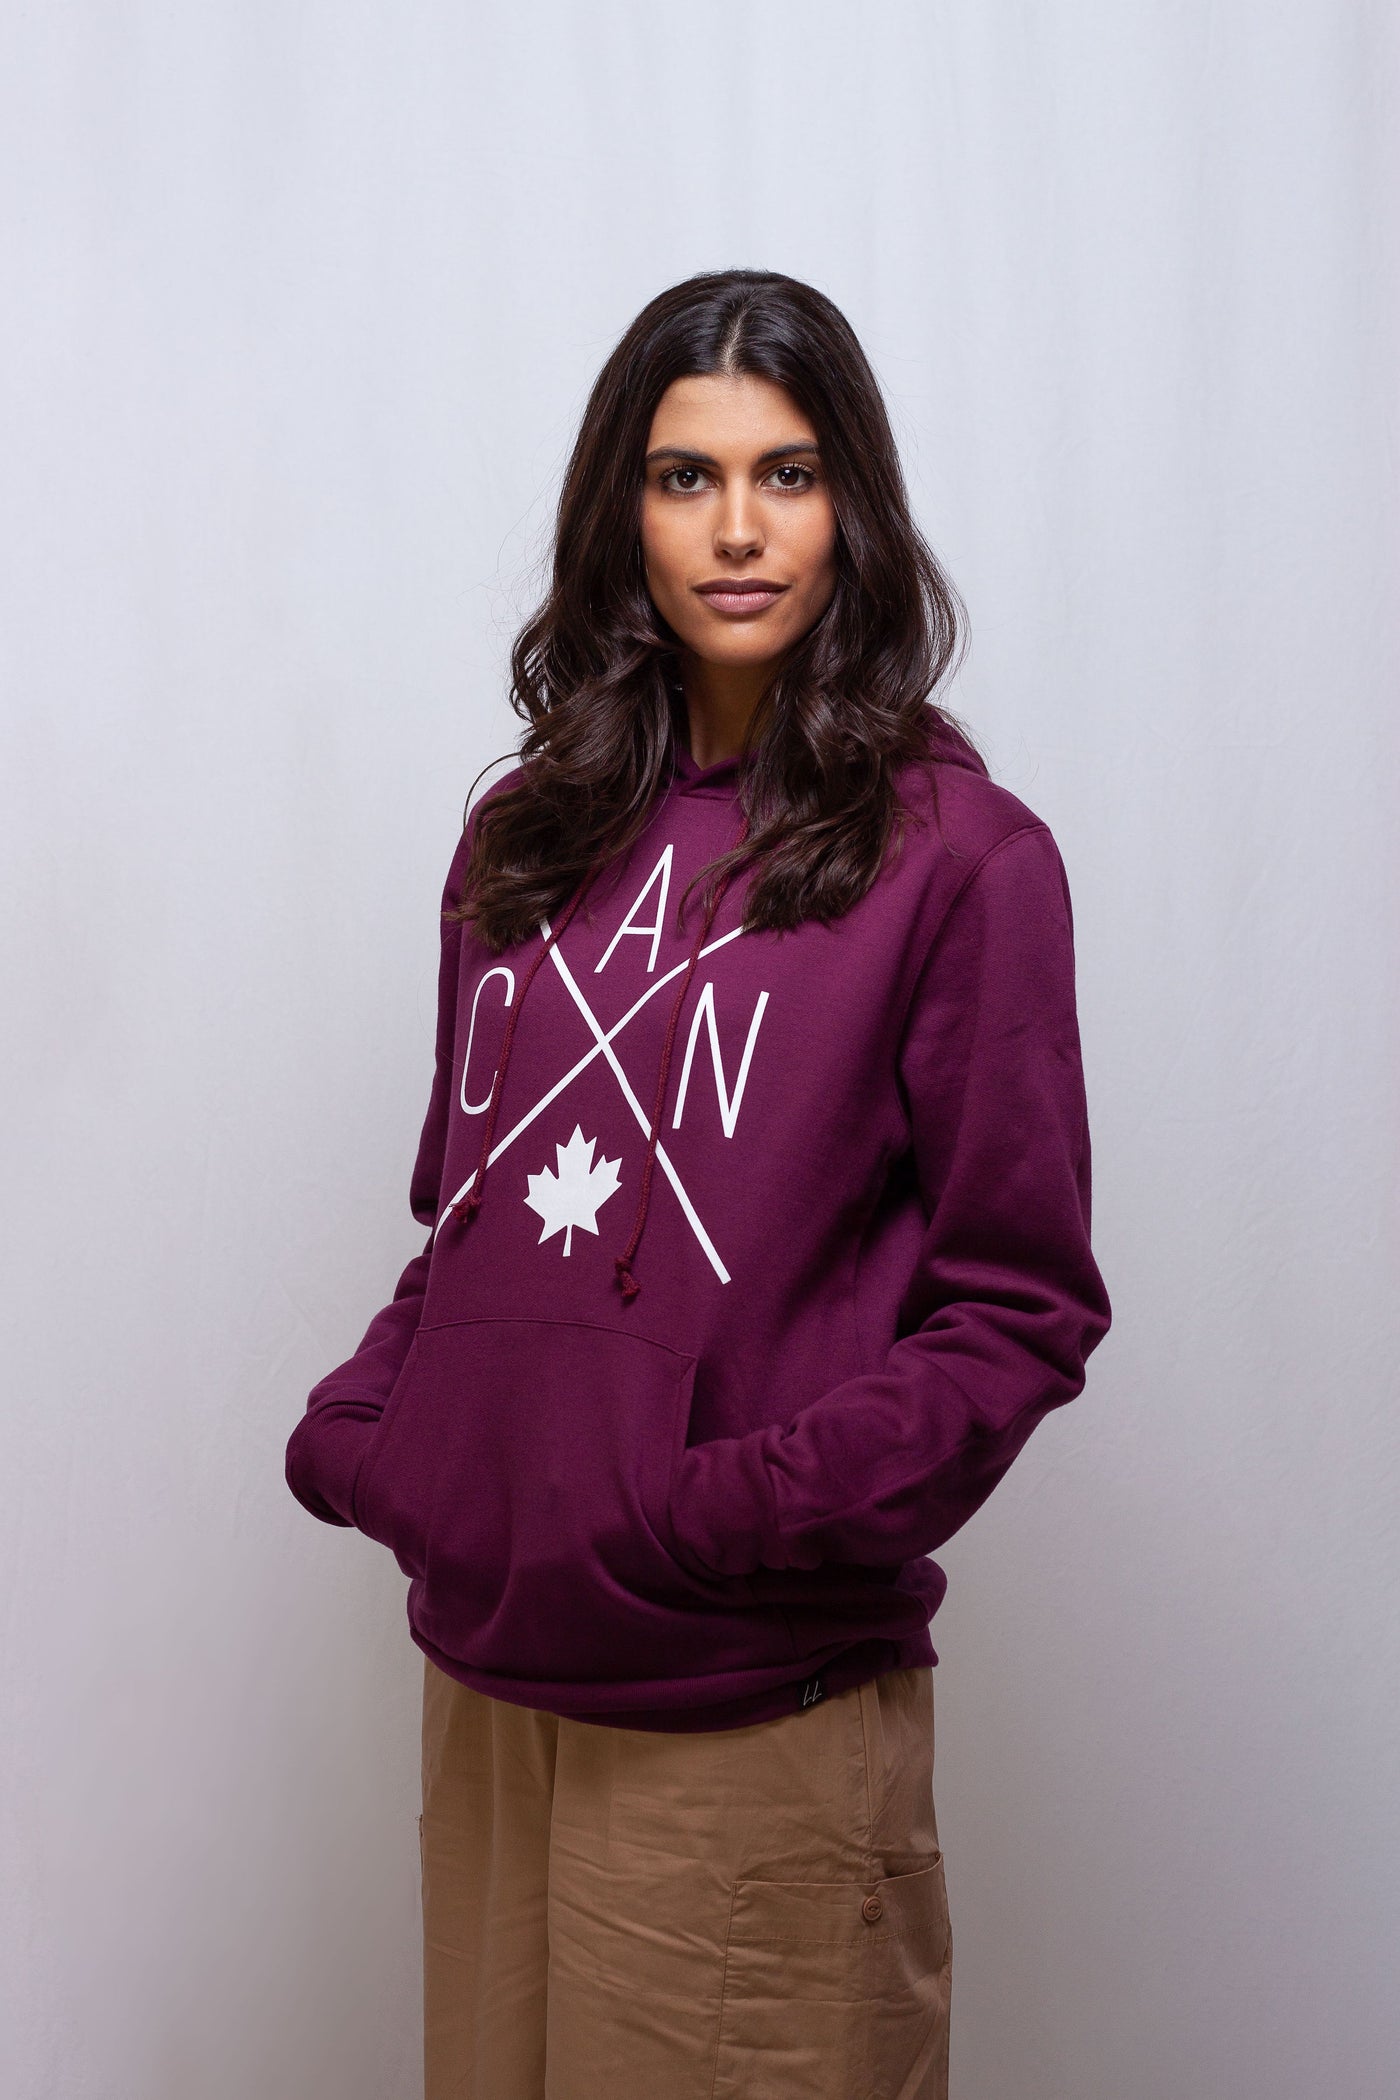 Individual wearing maroon Canadian made Hoodie featuring a Local Laundry trademarked CAN Maple Leaf Design. Wearing this hoodie supports local communities and economies.